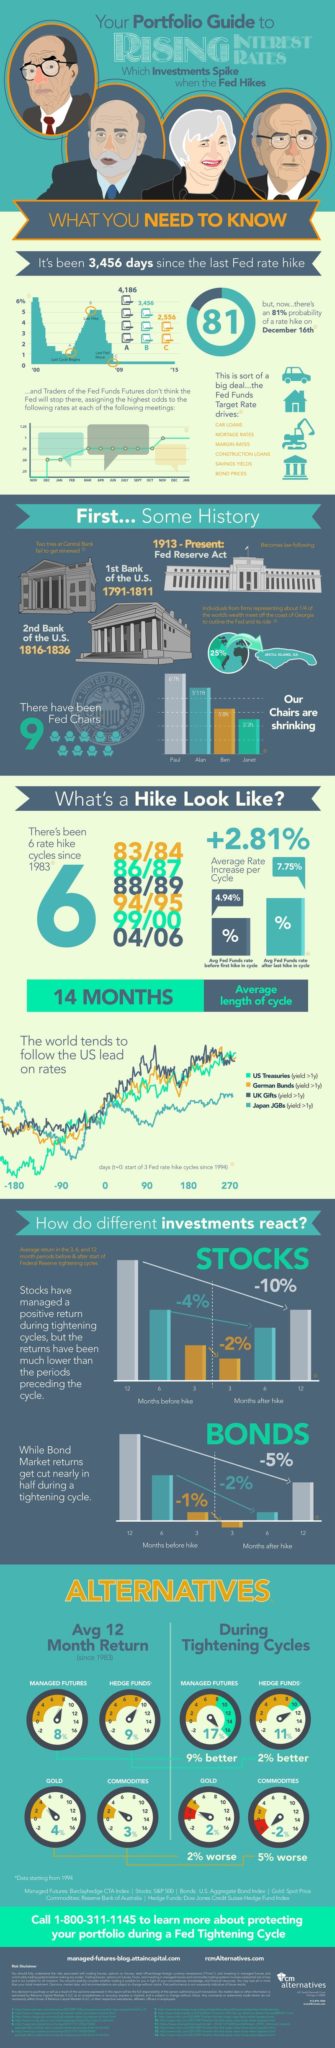 151220 Infographic_Your_Portfolio_Guide_to_Rising_Interest_Rates_Final_Bigger